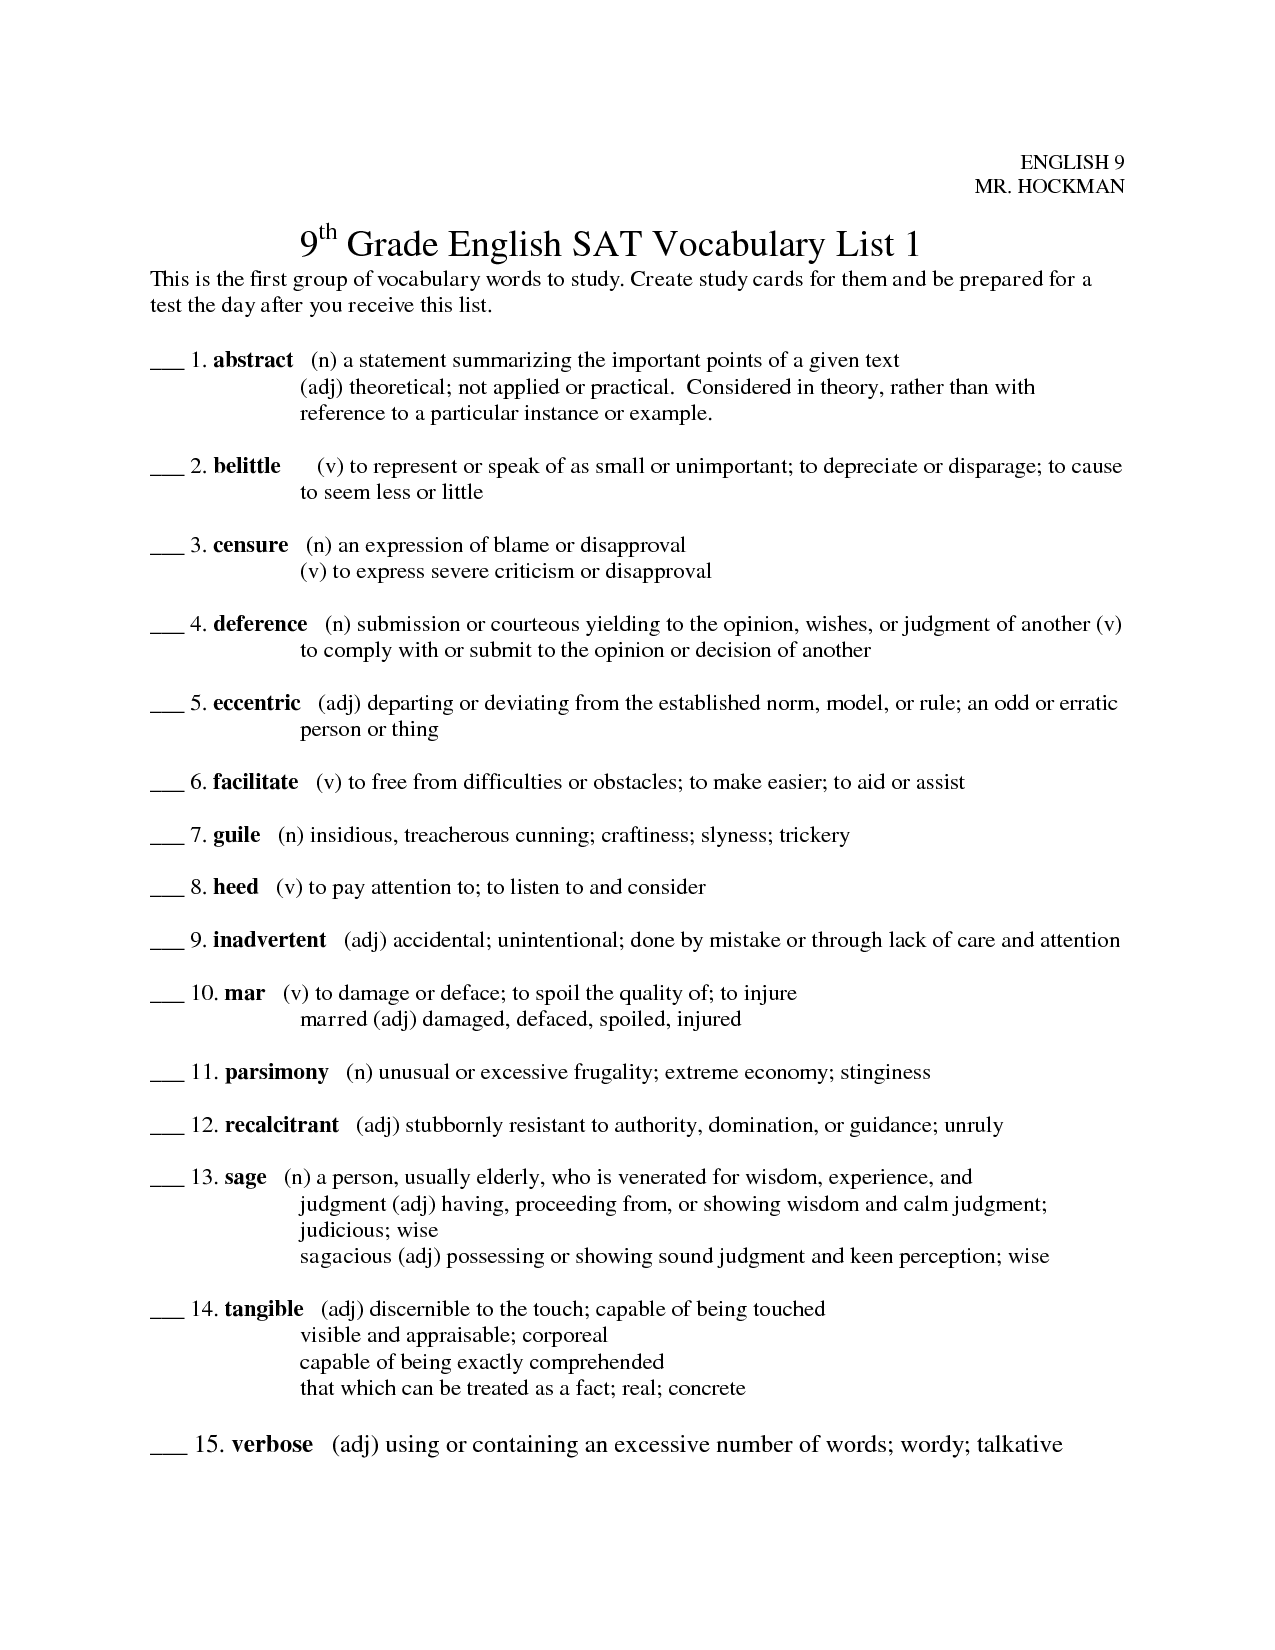 19-best-images-of-9th-grade-english-worksheets-printable-9th-grade-math-worksheets-printable